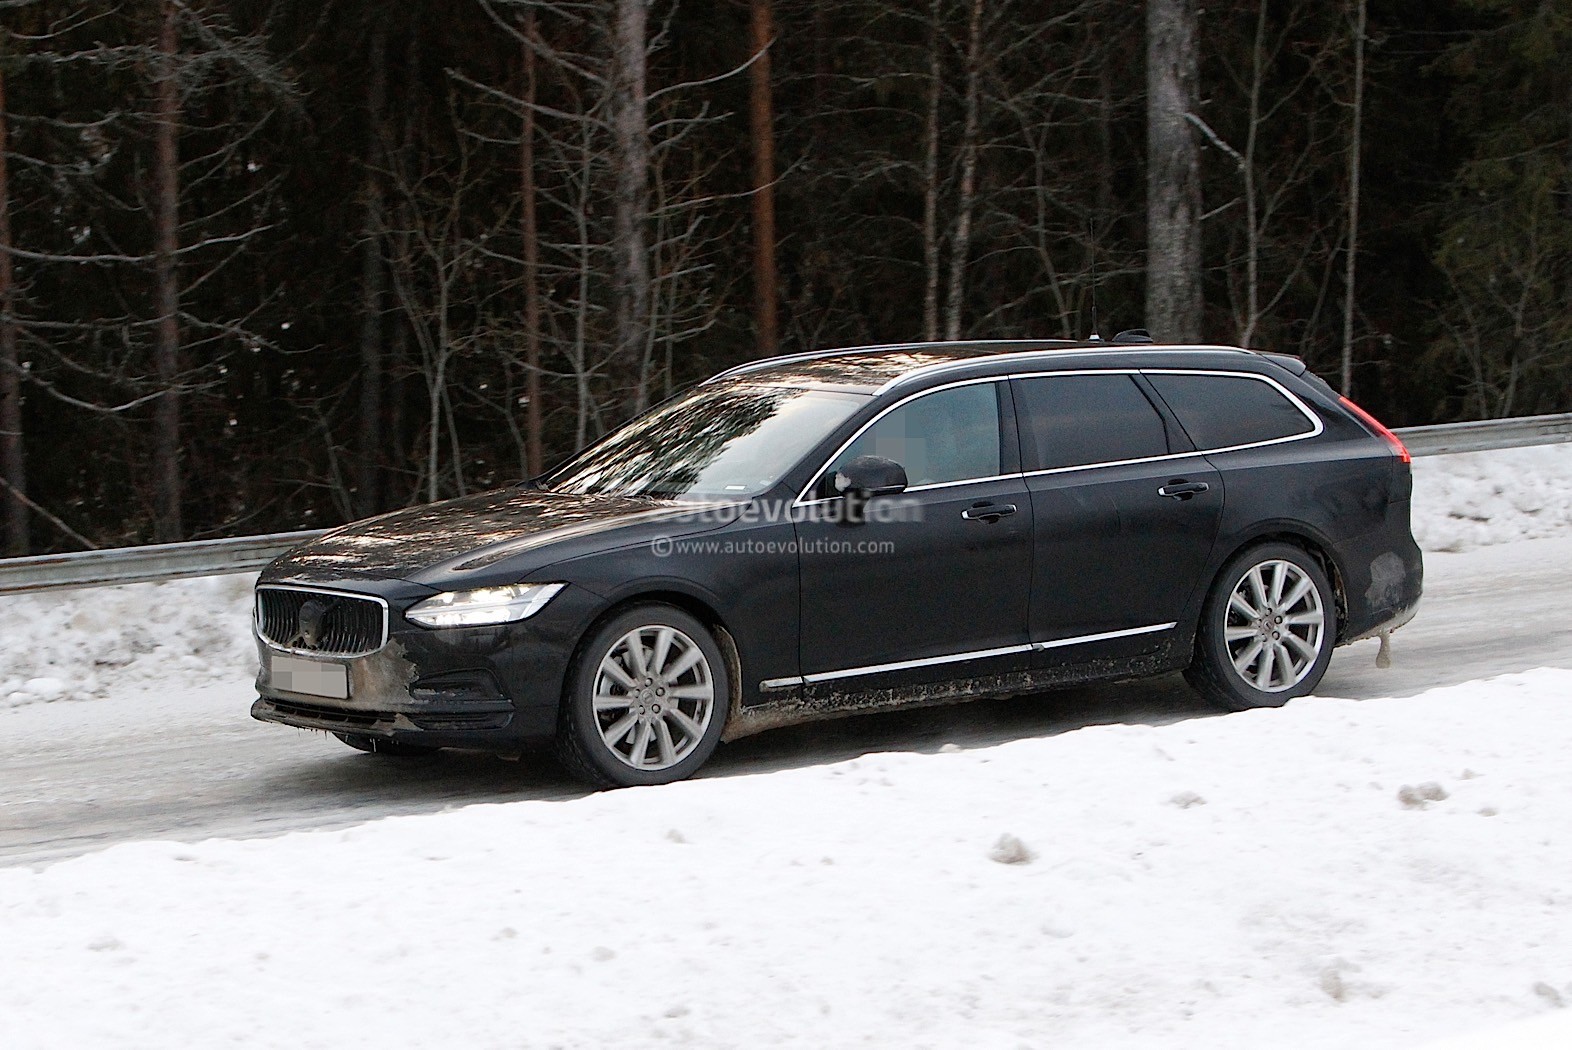 https://s1.cdn.autoevolution.com/images/news/gallery/2021-volvo-s90-and-v90-facelift-wear-useless-camouflage-winter-testing_7.jpg